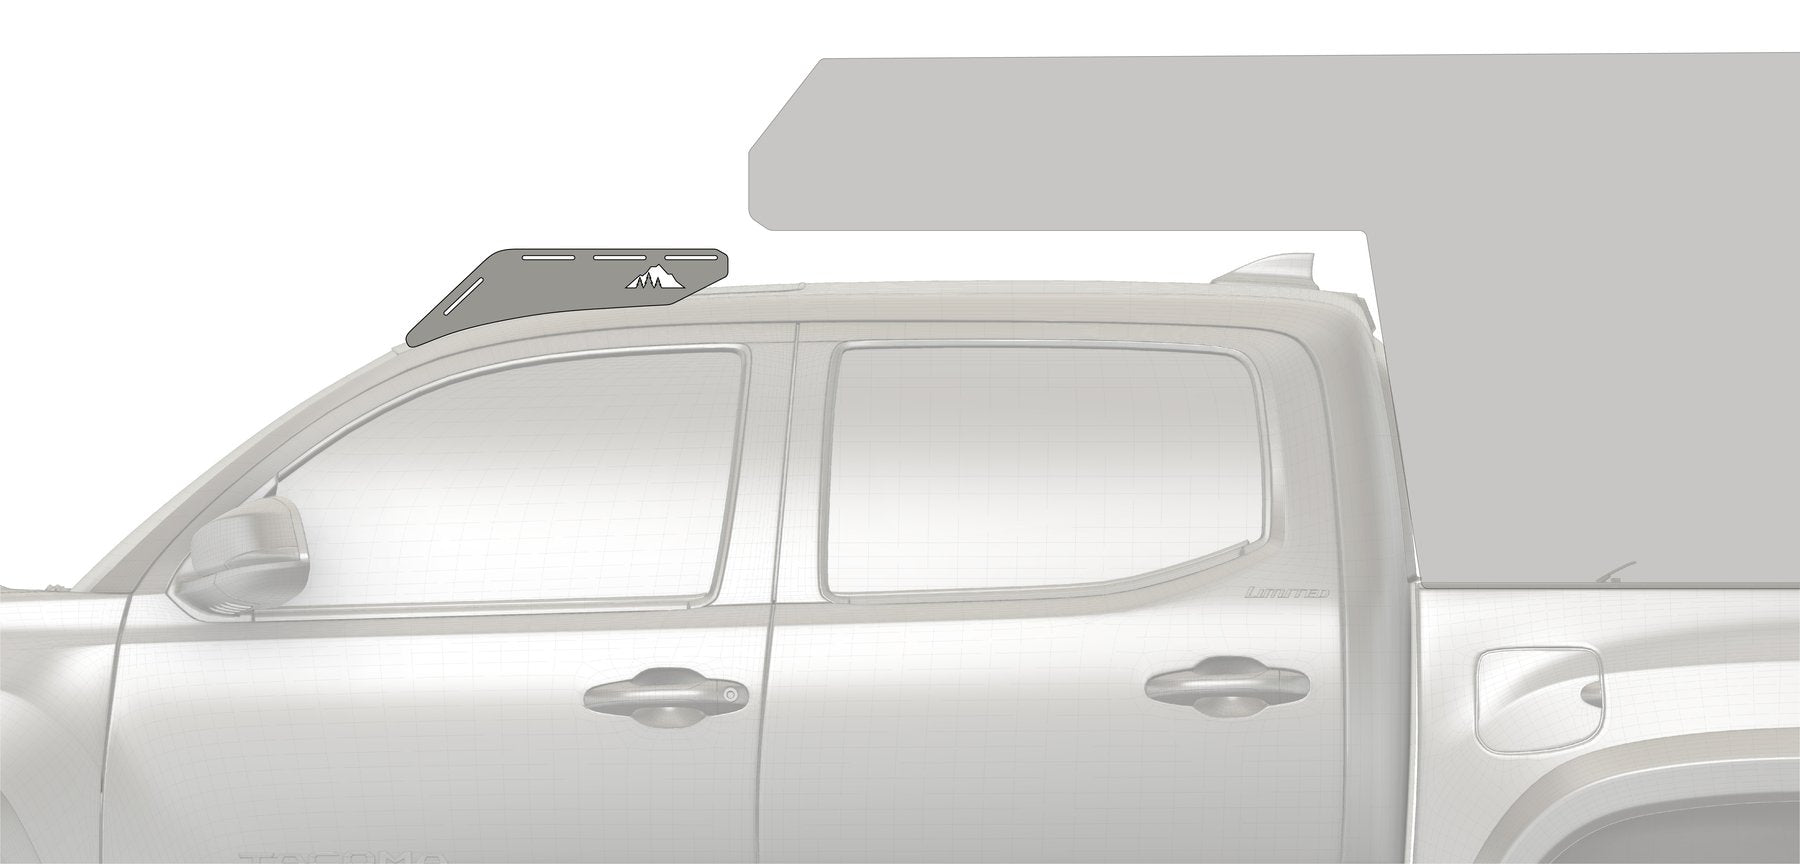 Sherpa Equipment Co - The Animas (2005-2022 Tacoma Camper Roof Rack)